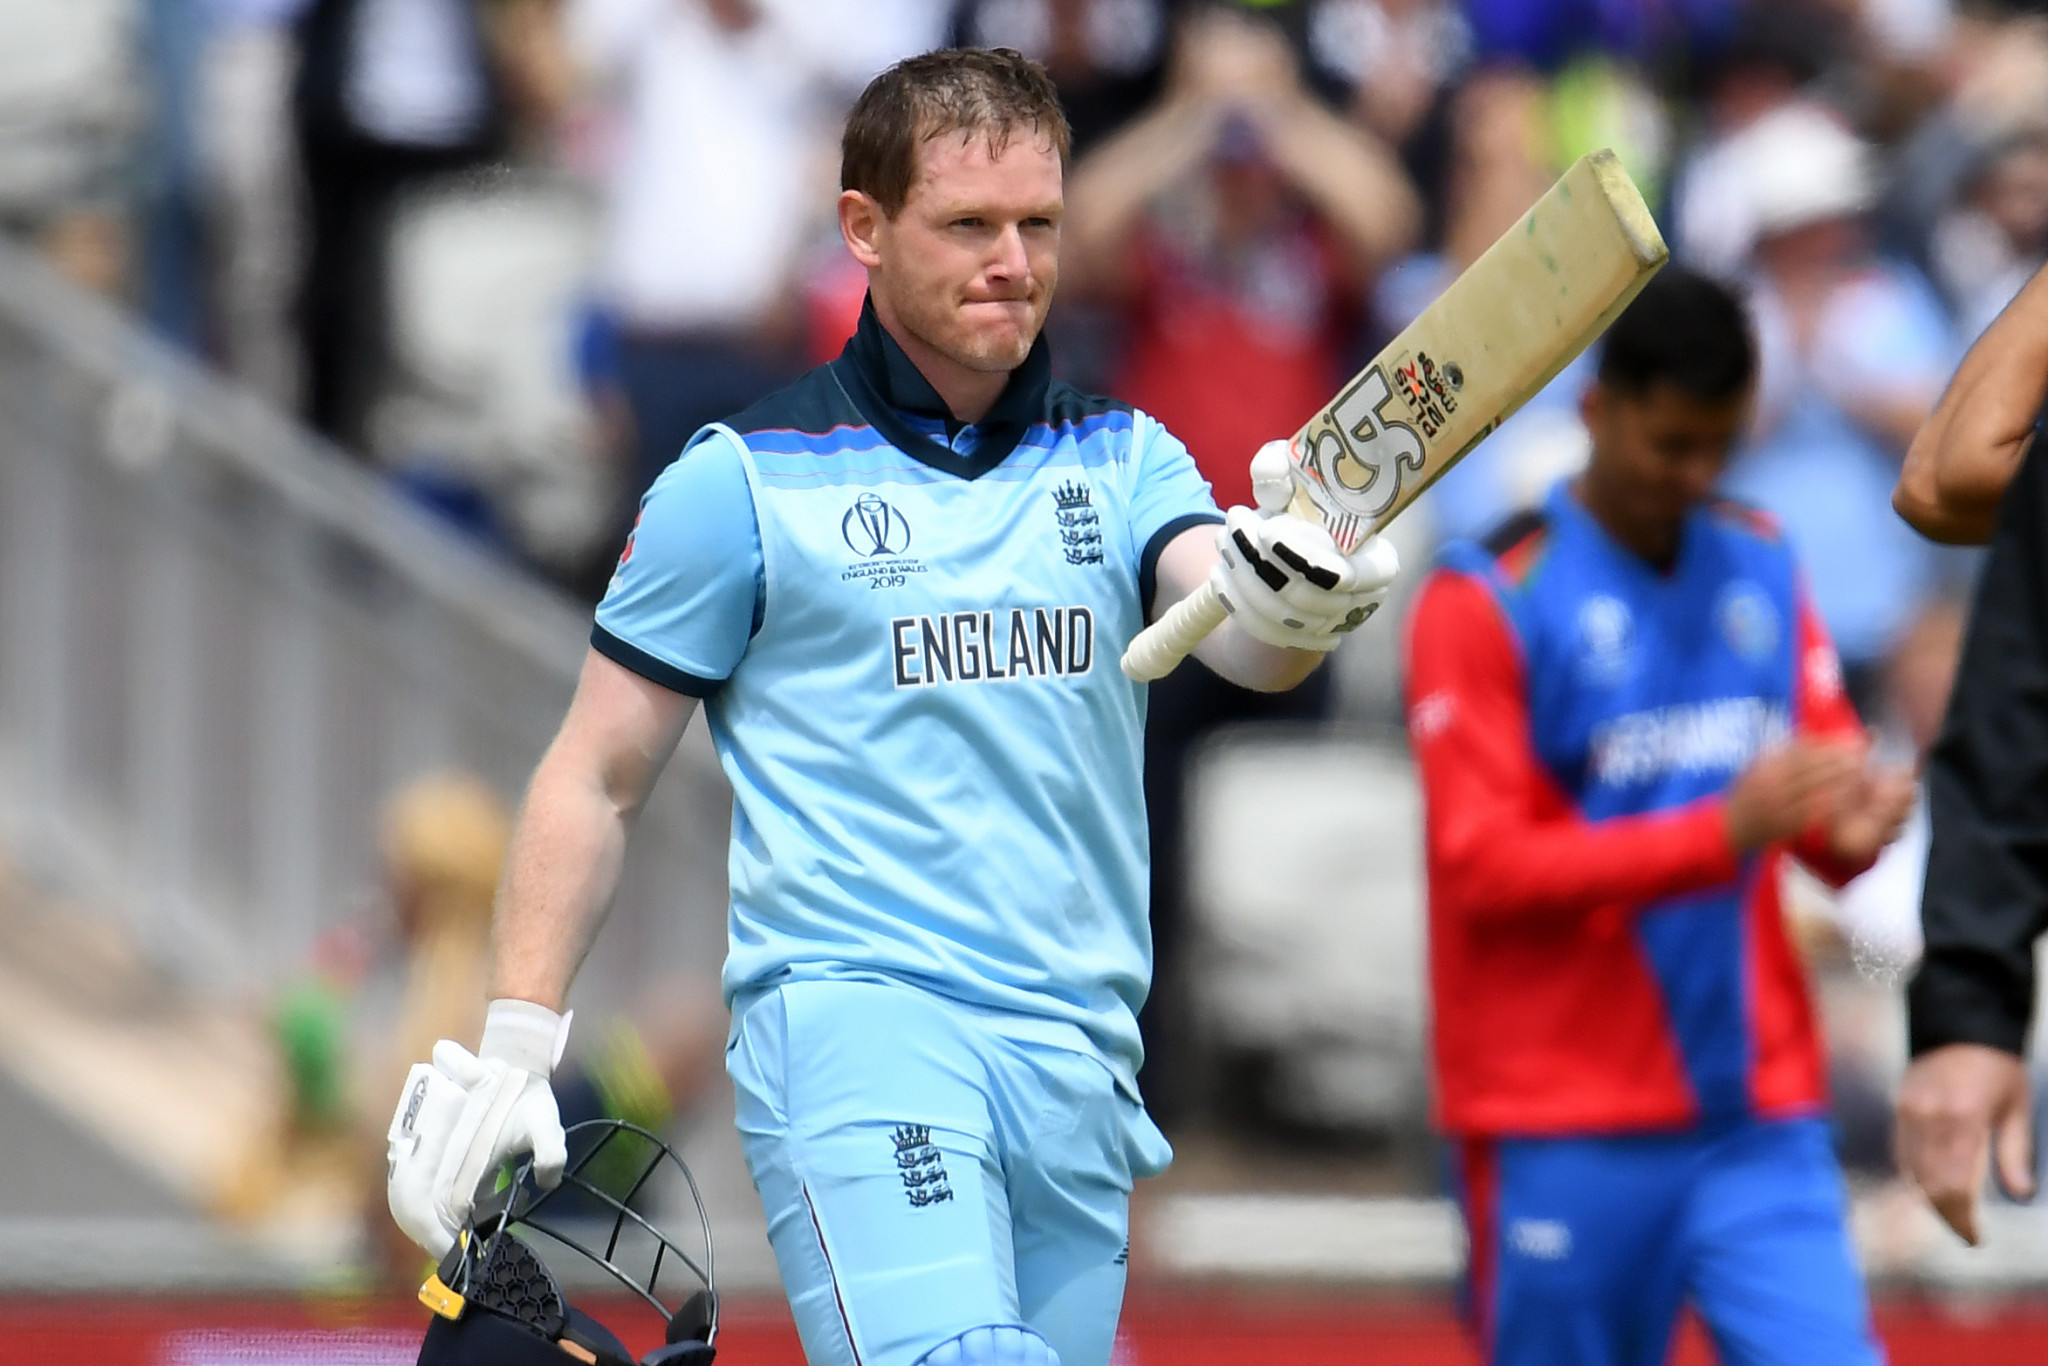 Eoin Morgan hit 17 sixes for England against Afghanistan at the Cricket World Cup ©Getty Images